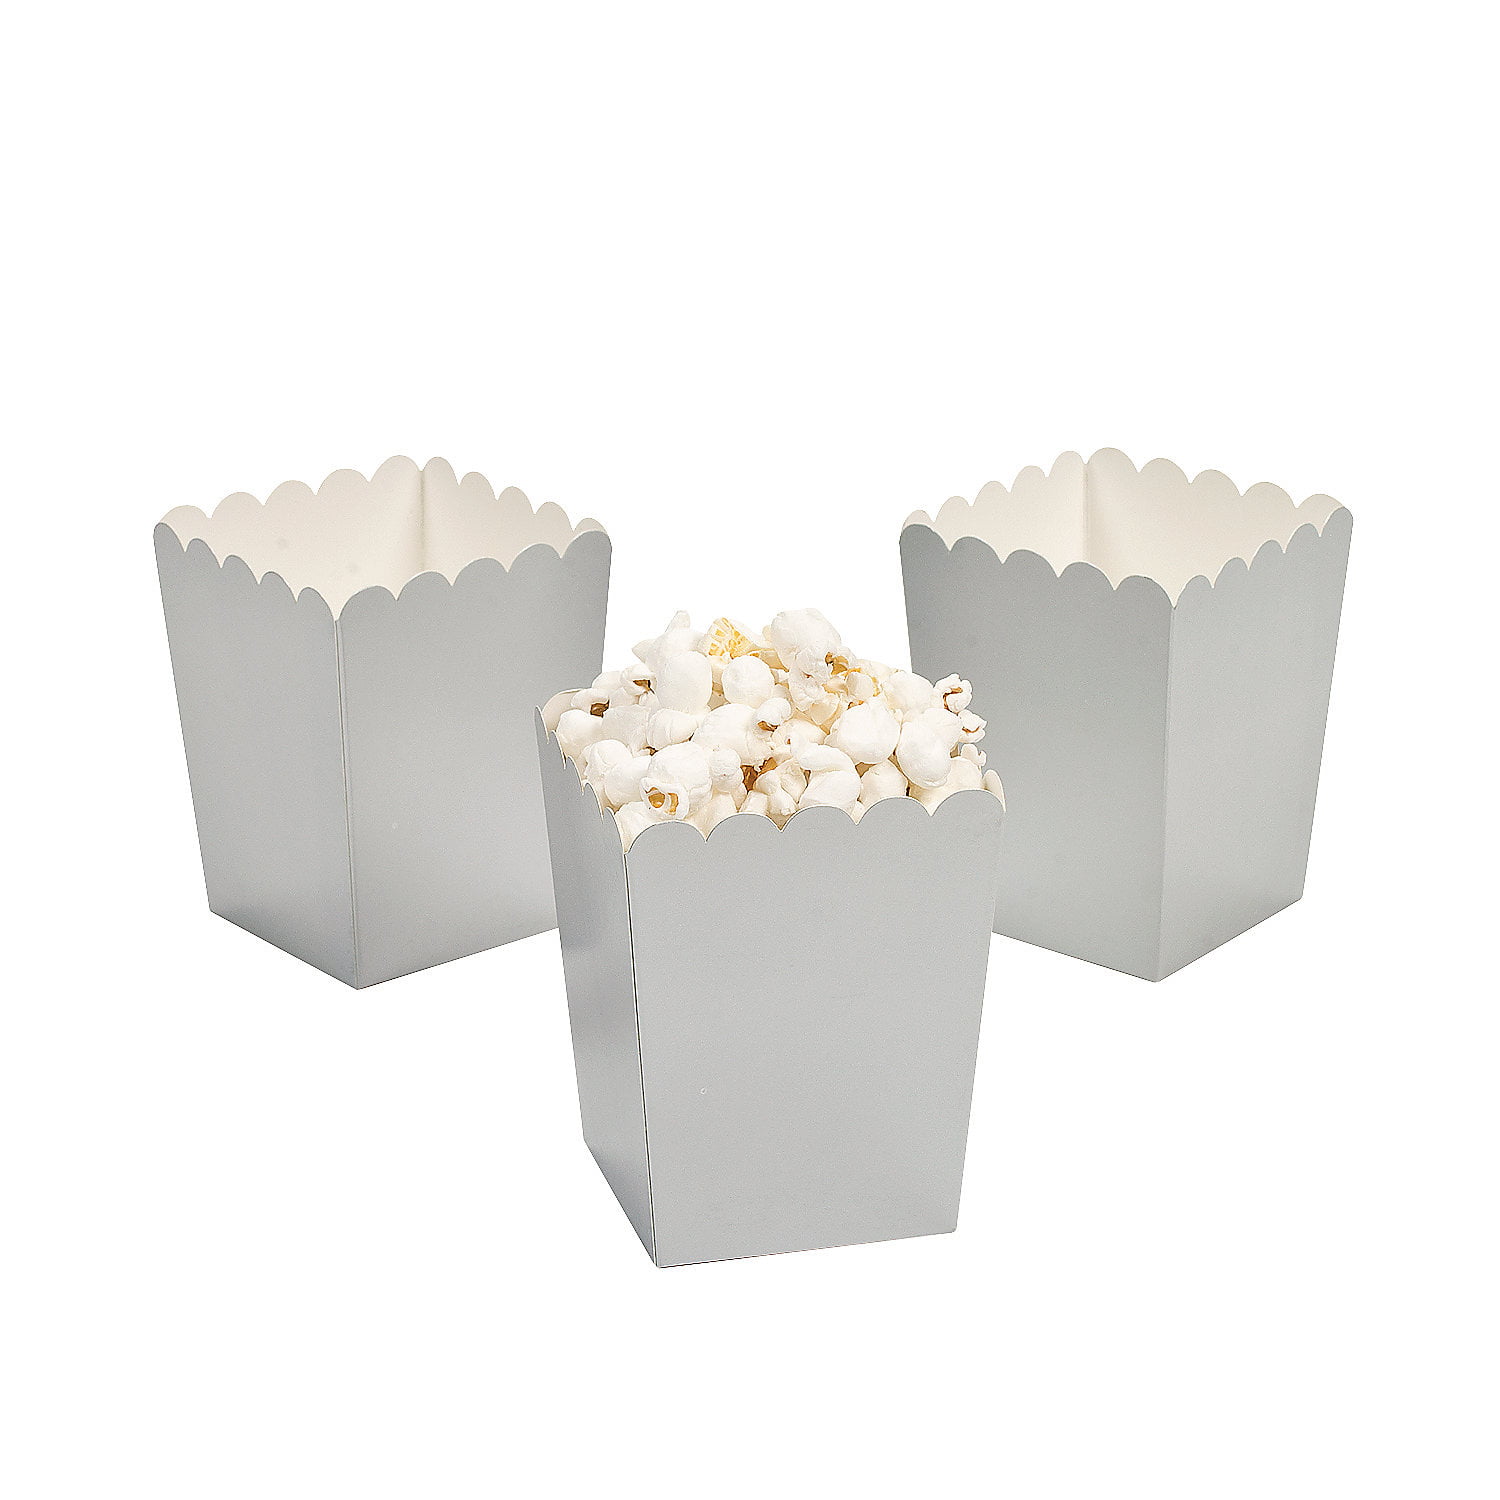 Official Stranger Things TV Show Movie Popcorn Sweet Treat Party Loot Boxes 8pc 